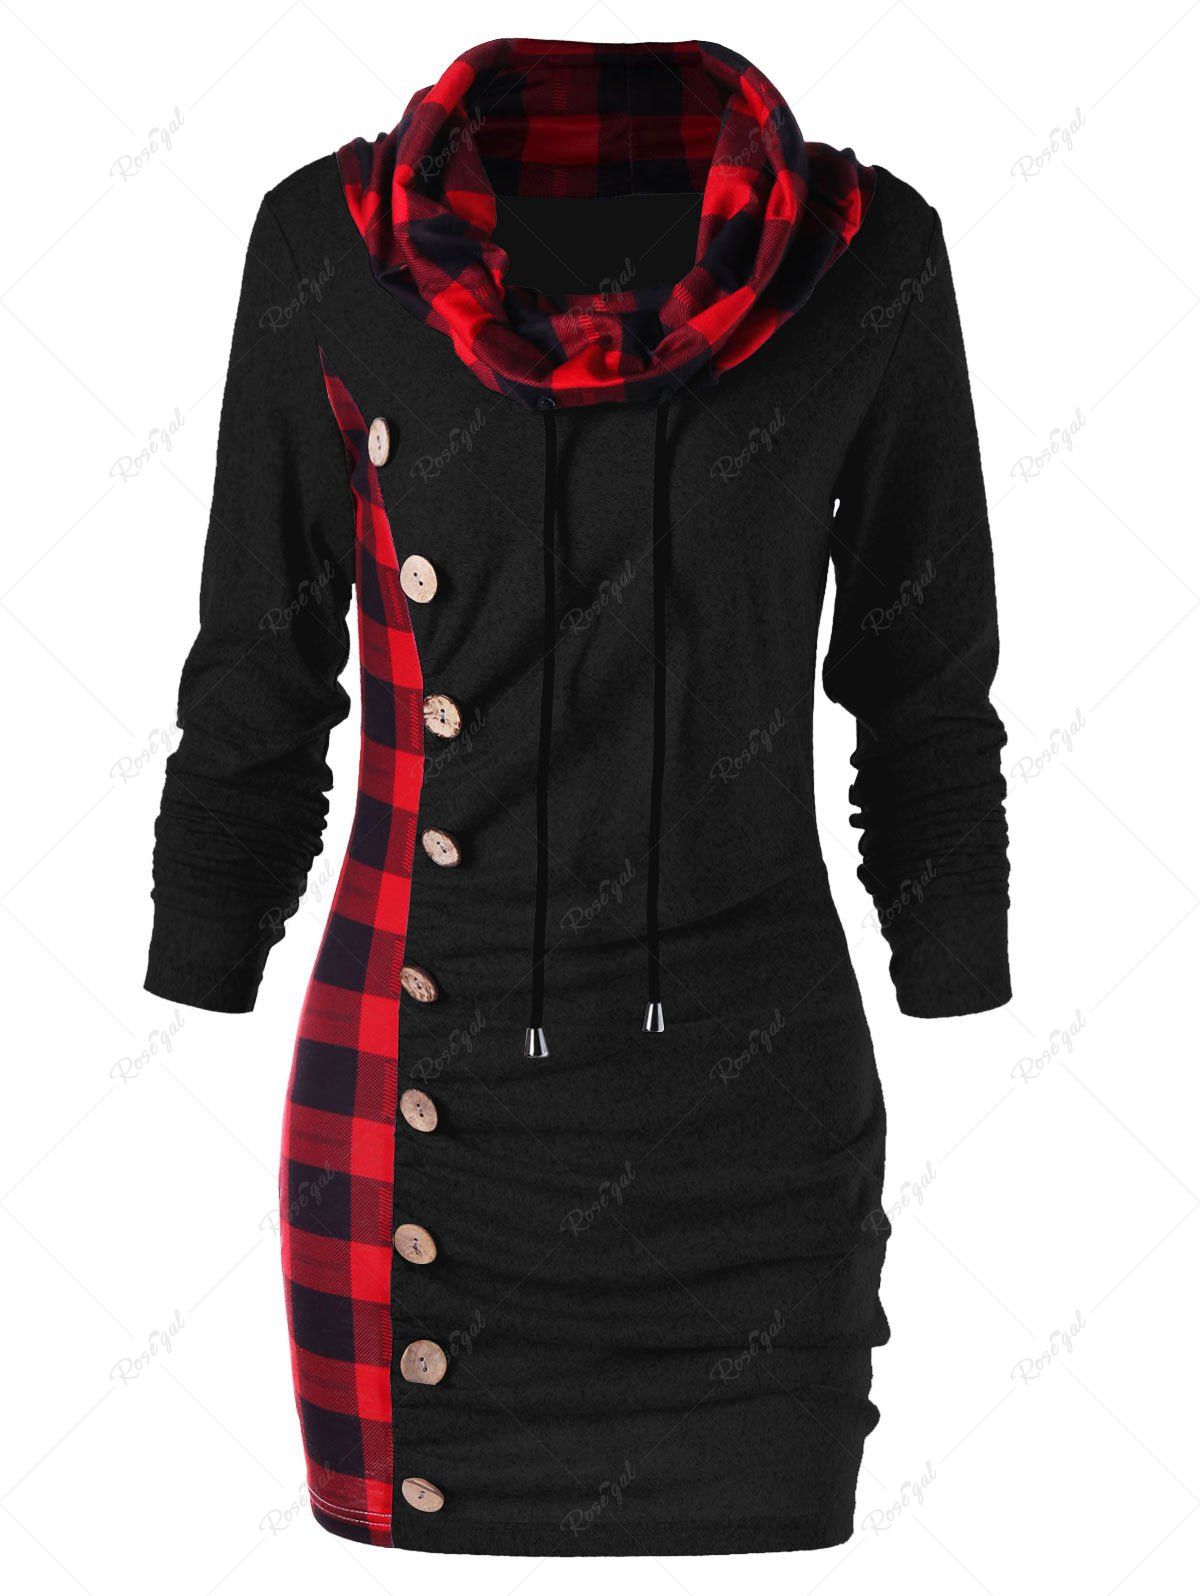 Hot Plus Size Plaid Cowl Neck Long Sleeves Mini Sweatshirt Dress with Buttons  